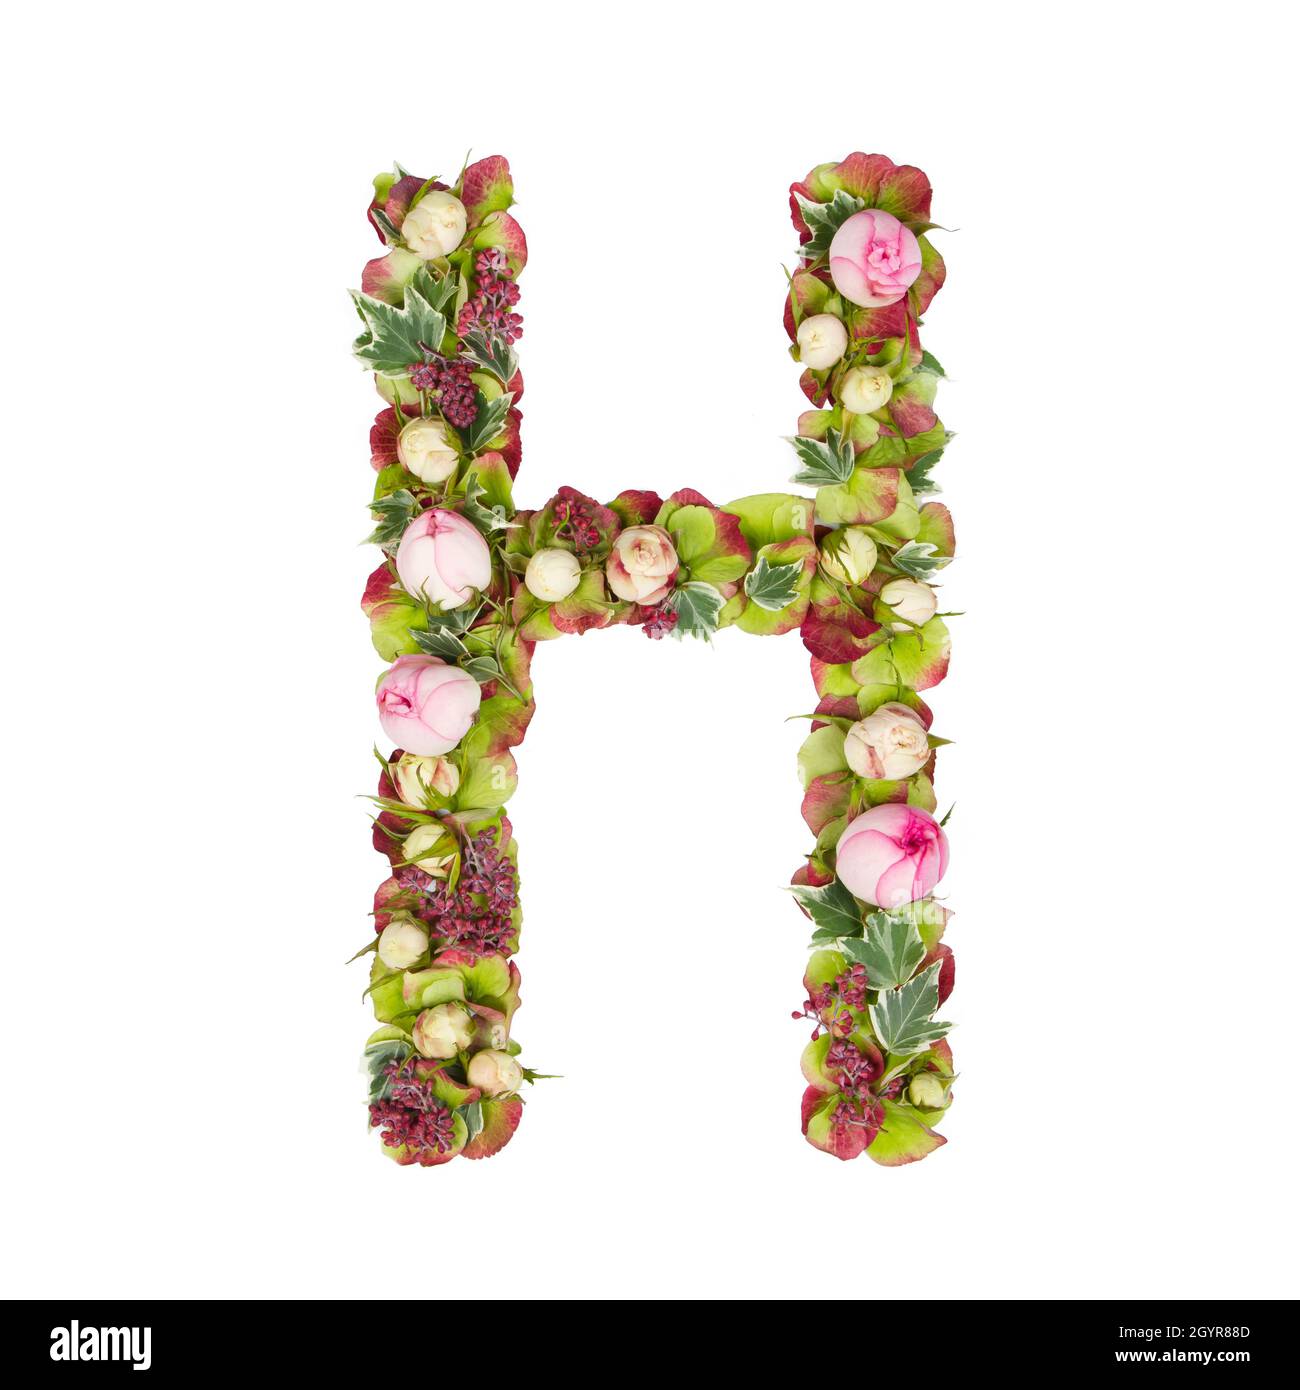 Capital Letter H Part of a set of letters, Numbers and symbols of the Alphabet made with flowers, branches and leaves on white background Stock Photo